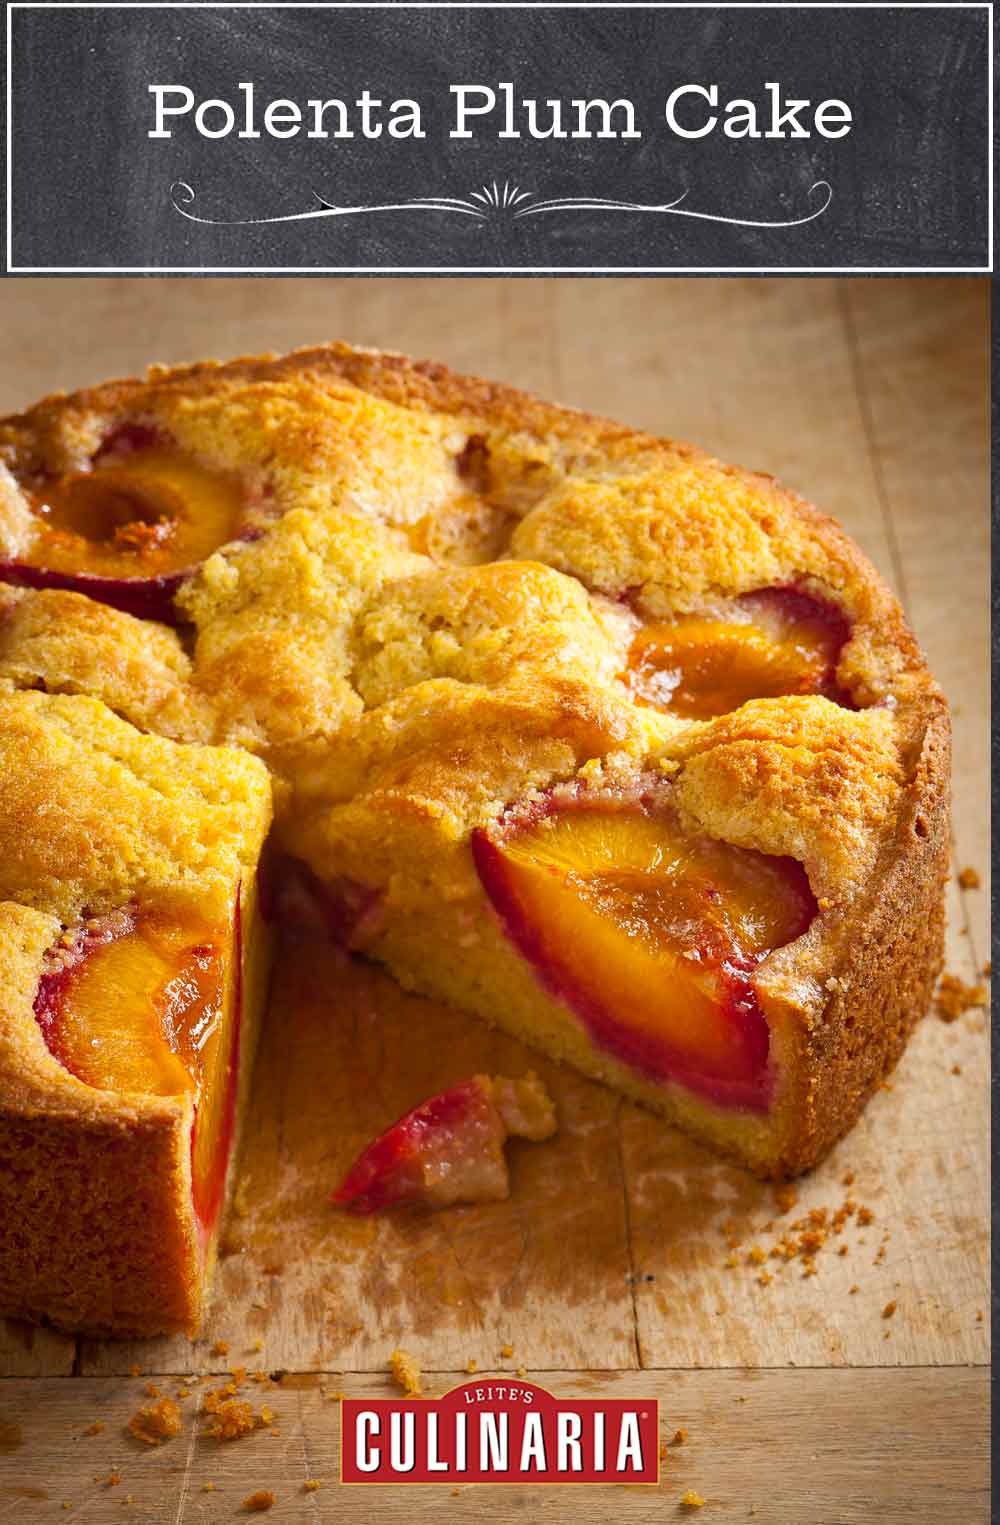 A round polenta plum cake on a wooden table with one slice cut from it.